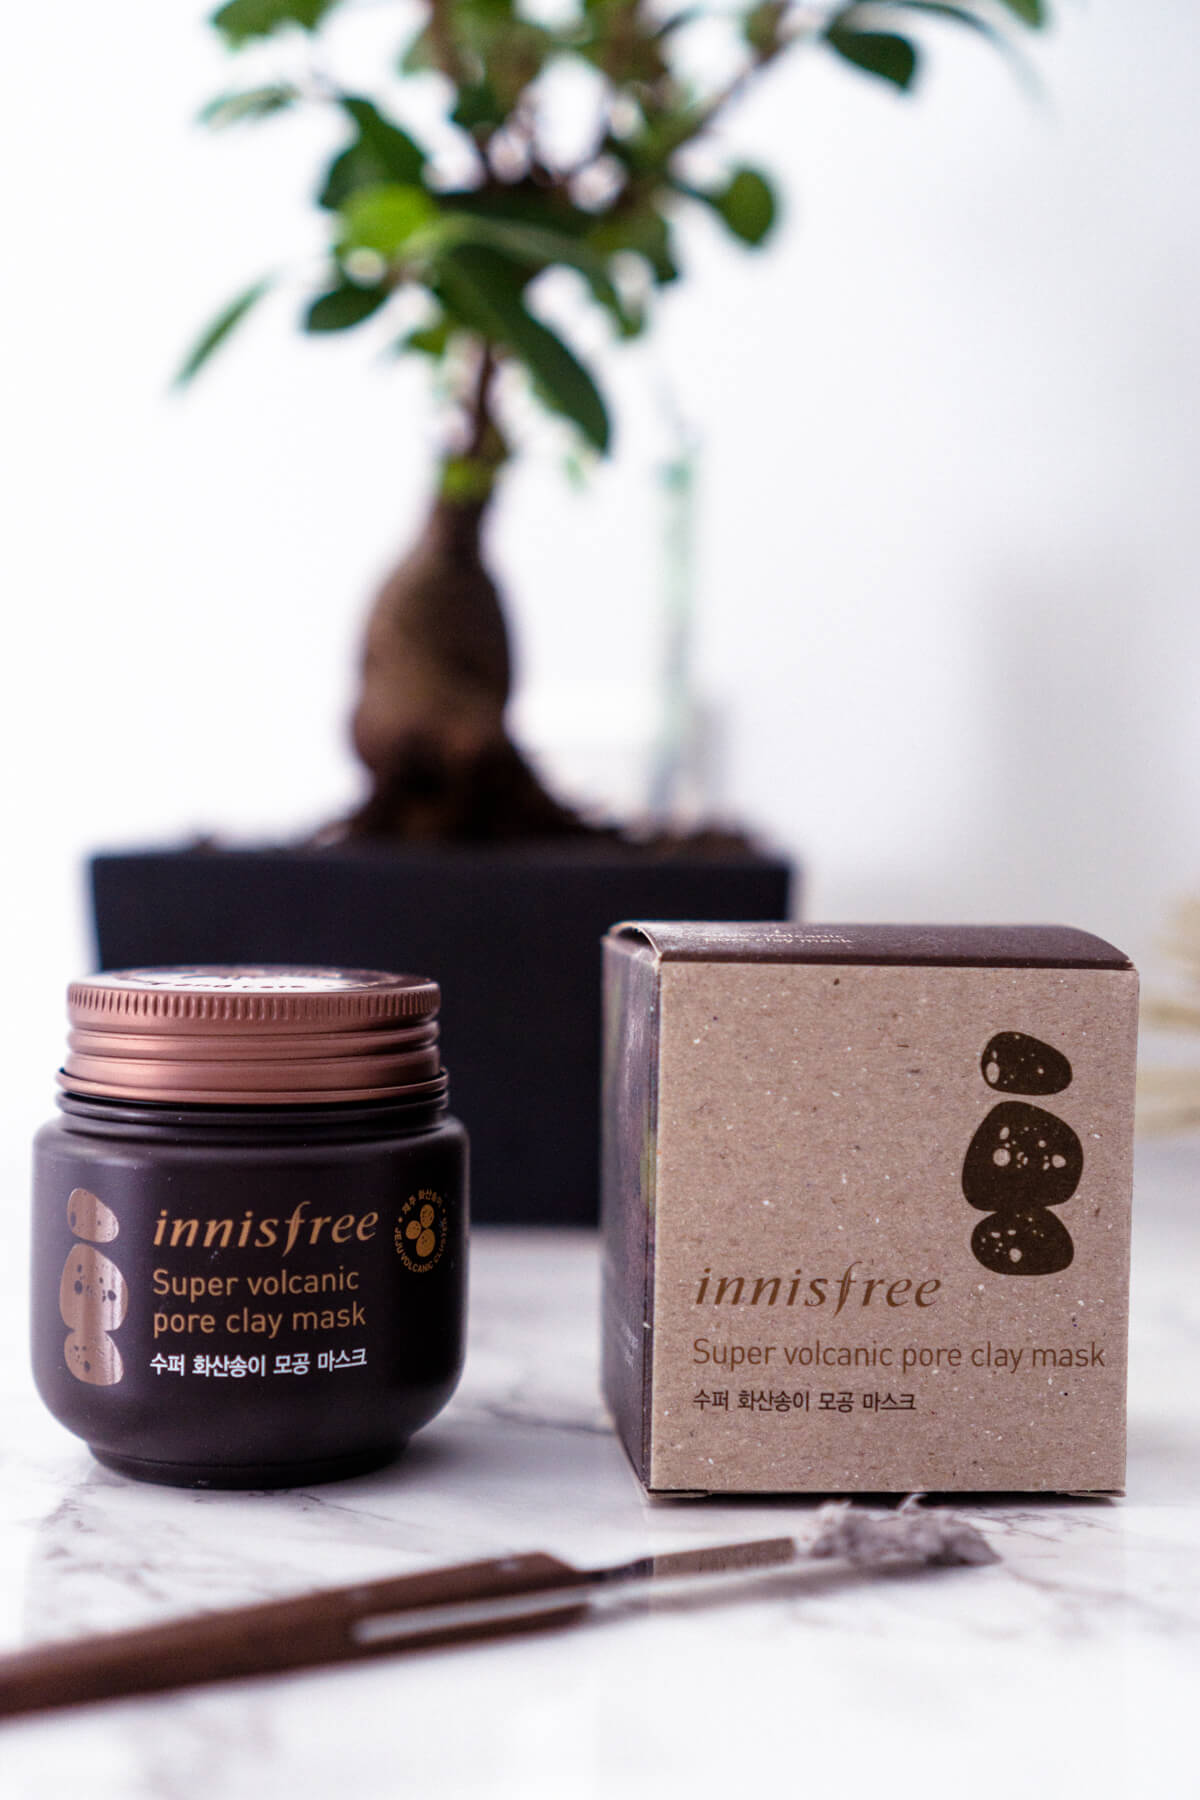 Innisfree Super Volcanic Pore Clay Mask Review